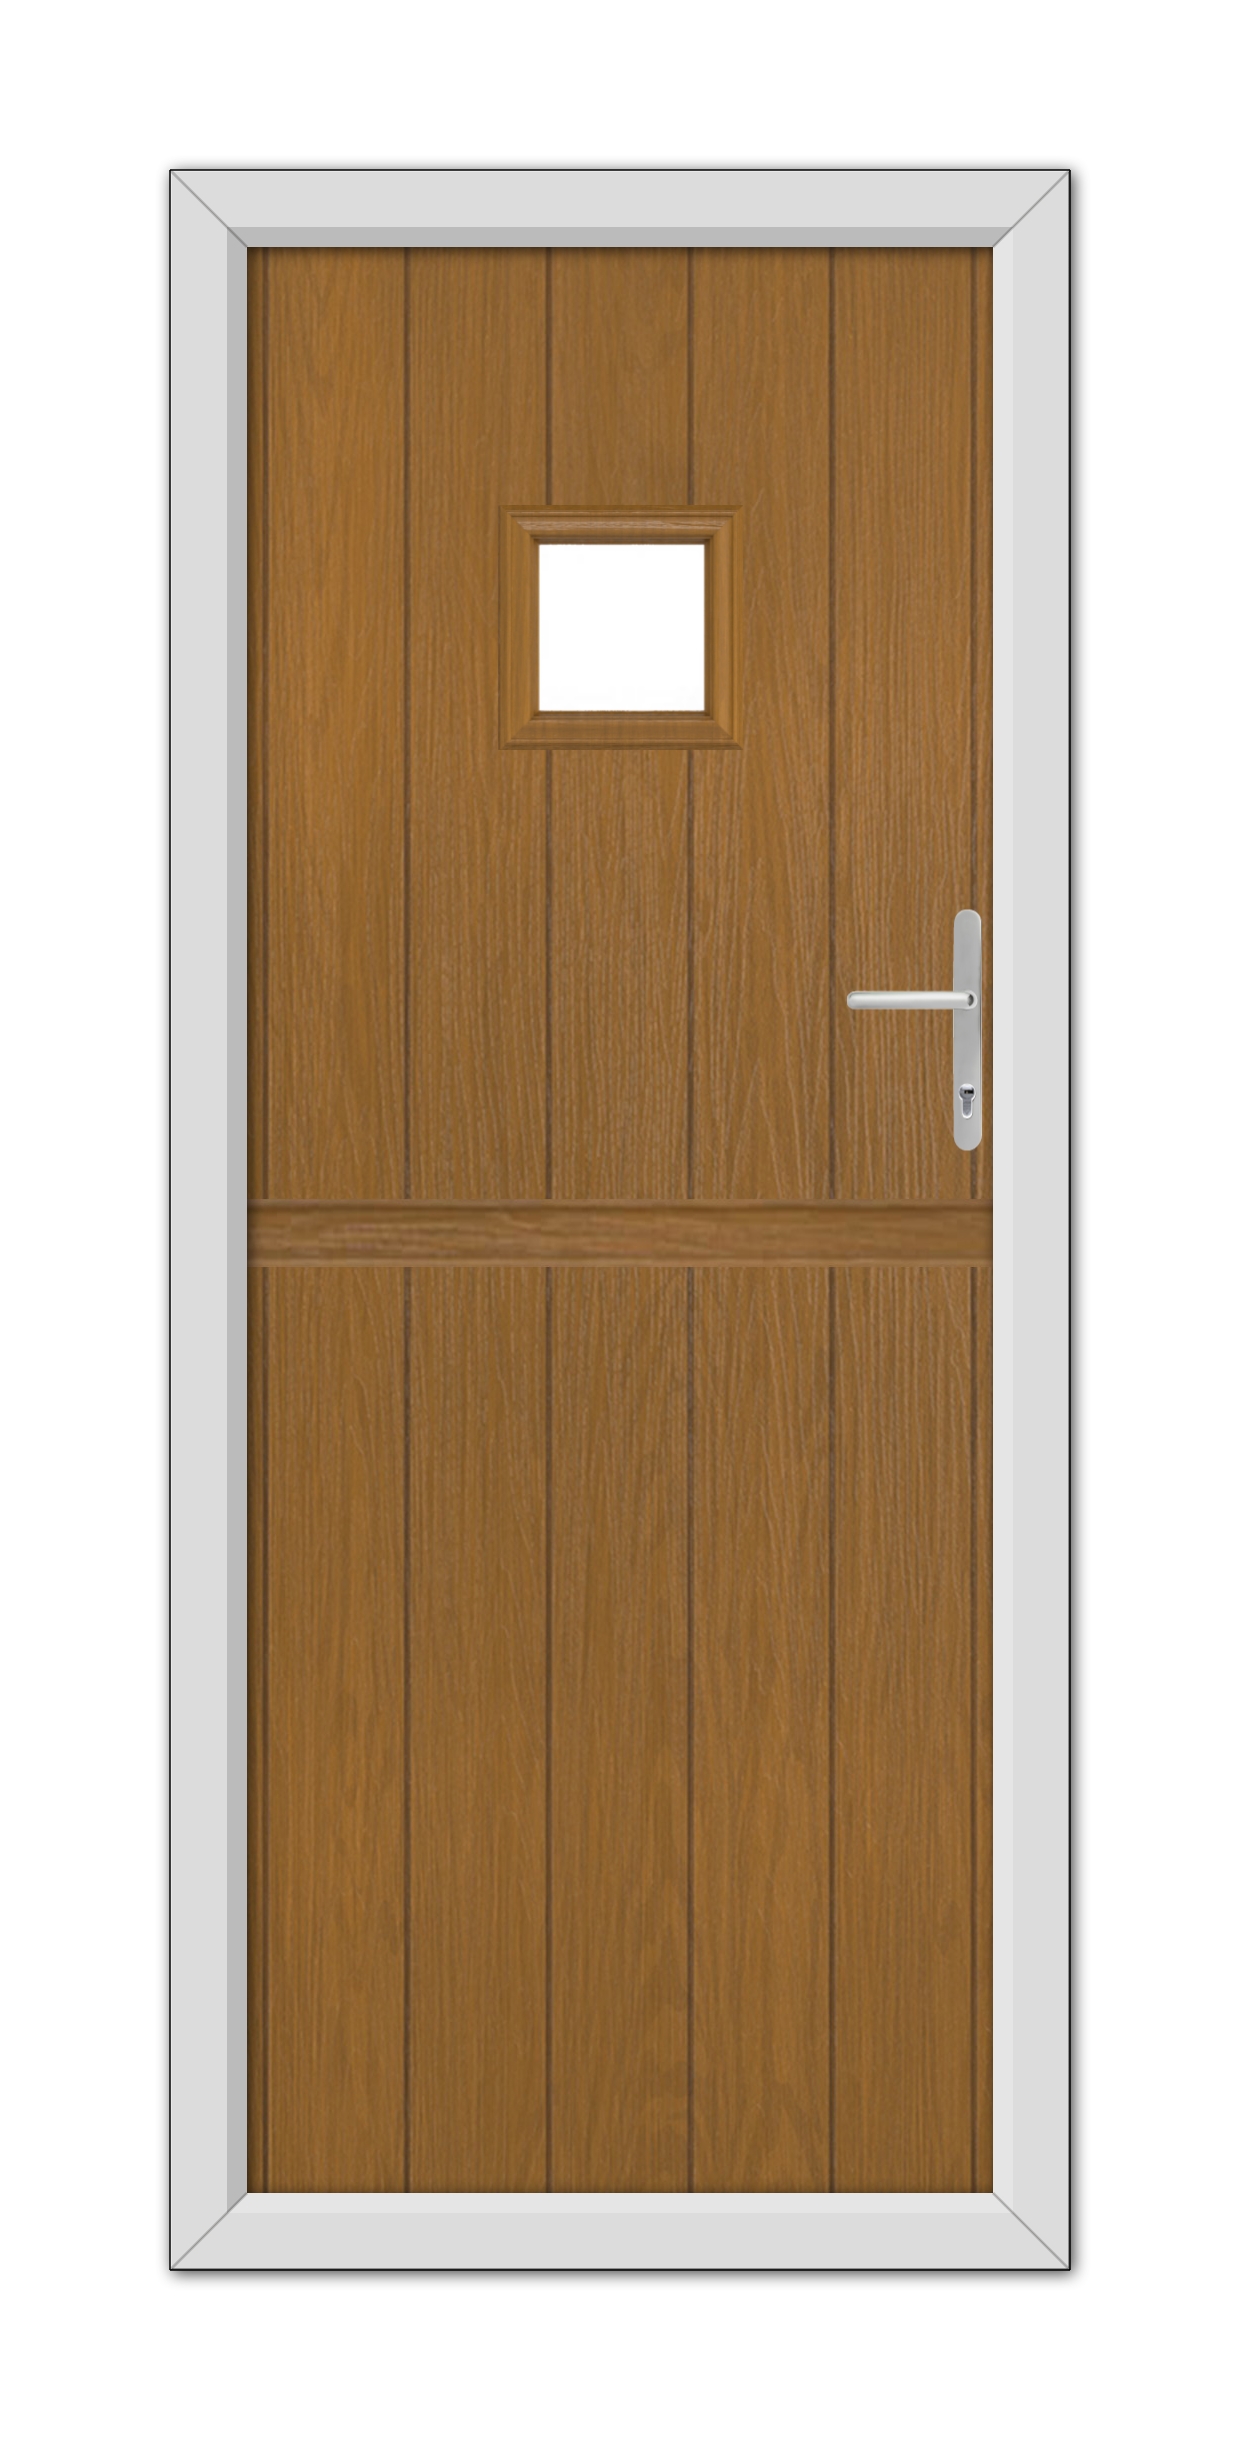 A modern Oak Brampton Stable Composite Door 48mm Timber Core with a small square window, equipped with a metal handle, set in a white frame.